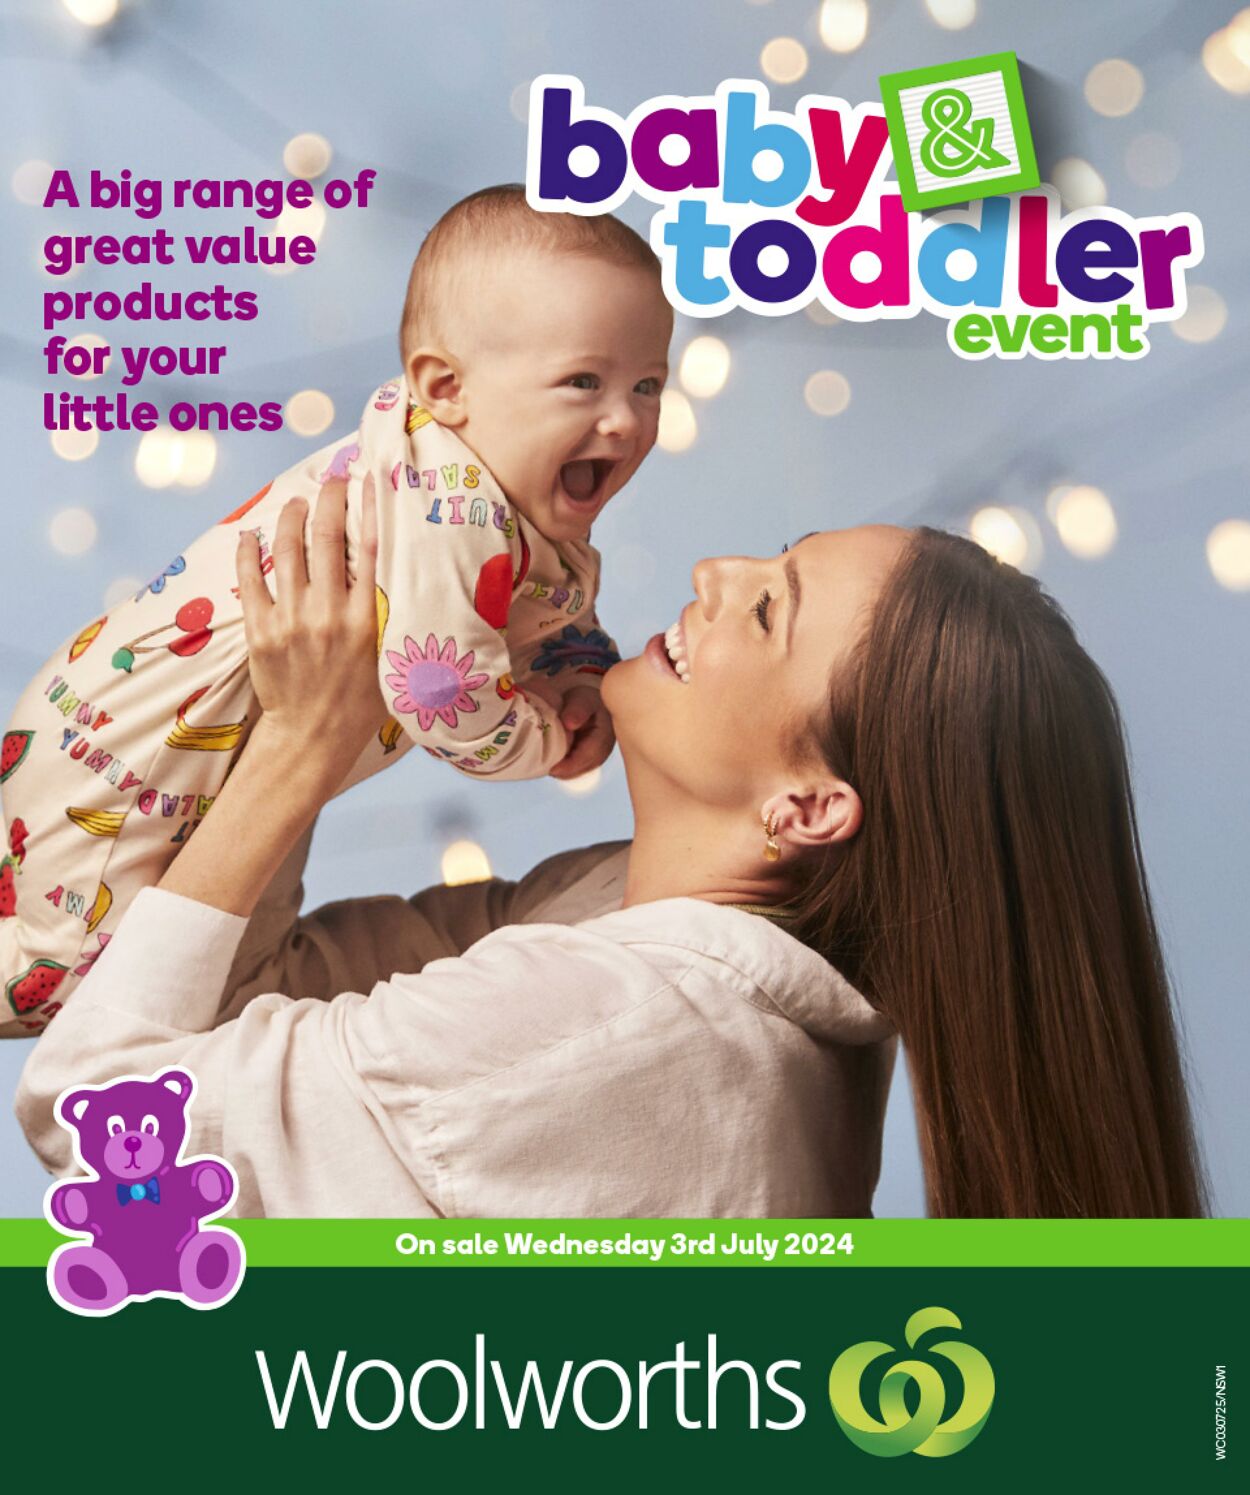 Catalogue Woolworths - Baby Toddler Event Catalogue NSW 3 Jul, 2024 - 9 Jul, 2024